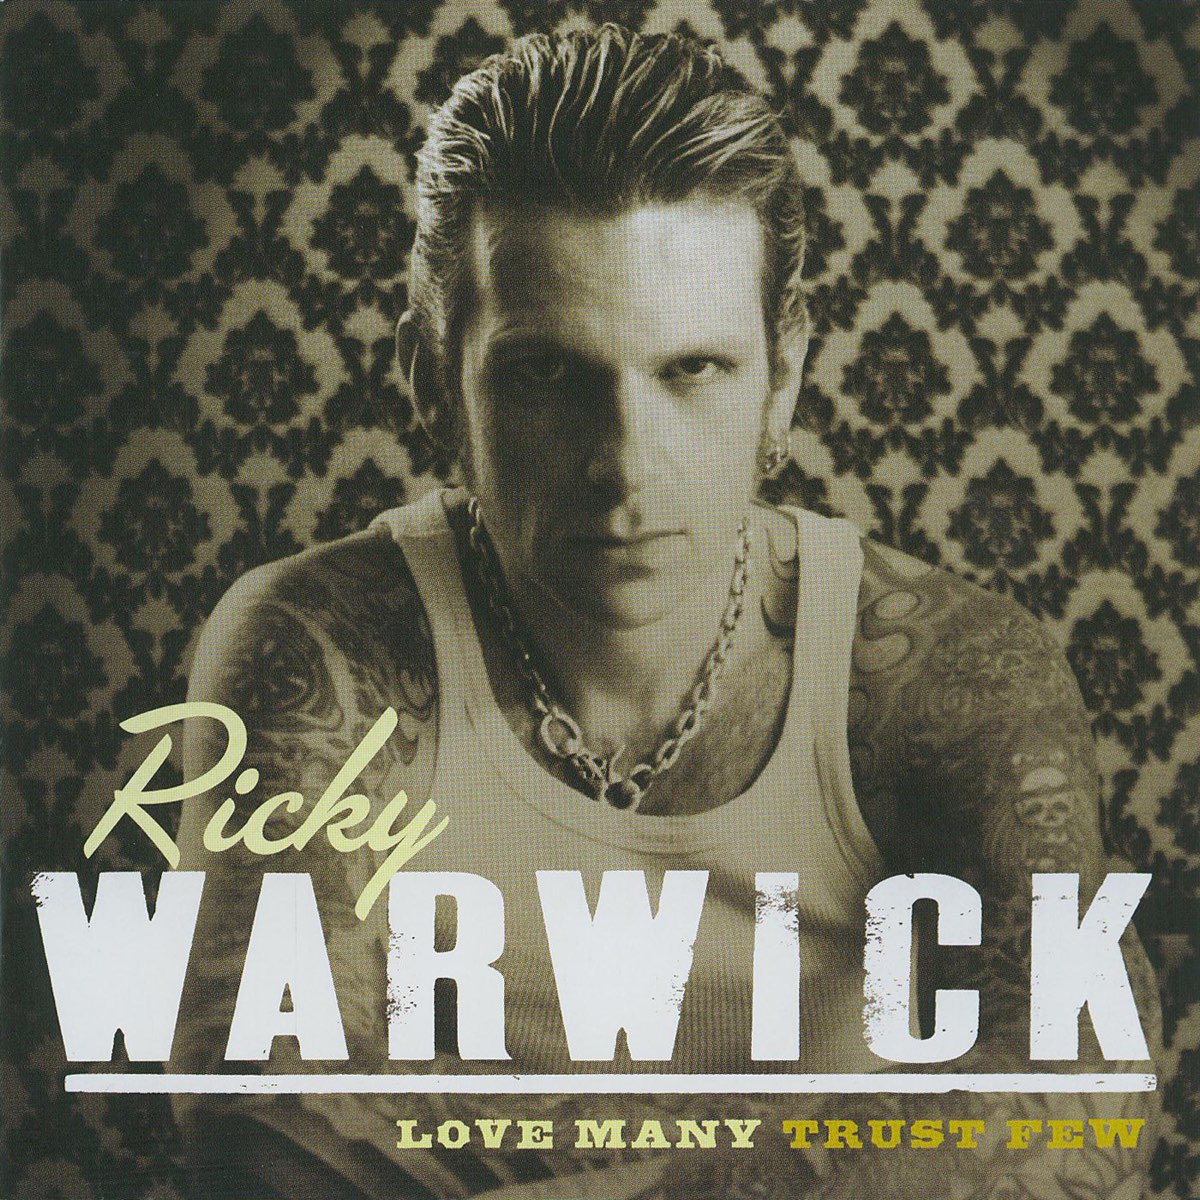 Cold september. Ricky Warwick - Love many Trust few. Рикки. Ricky Warwick when Life was hard and fast 2021. Ricky Warwick - Tattoos and Alibis (2003).